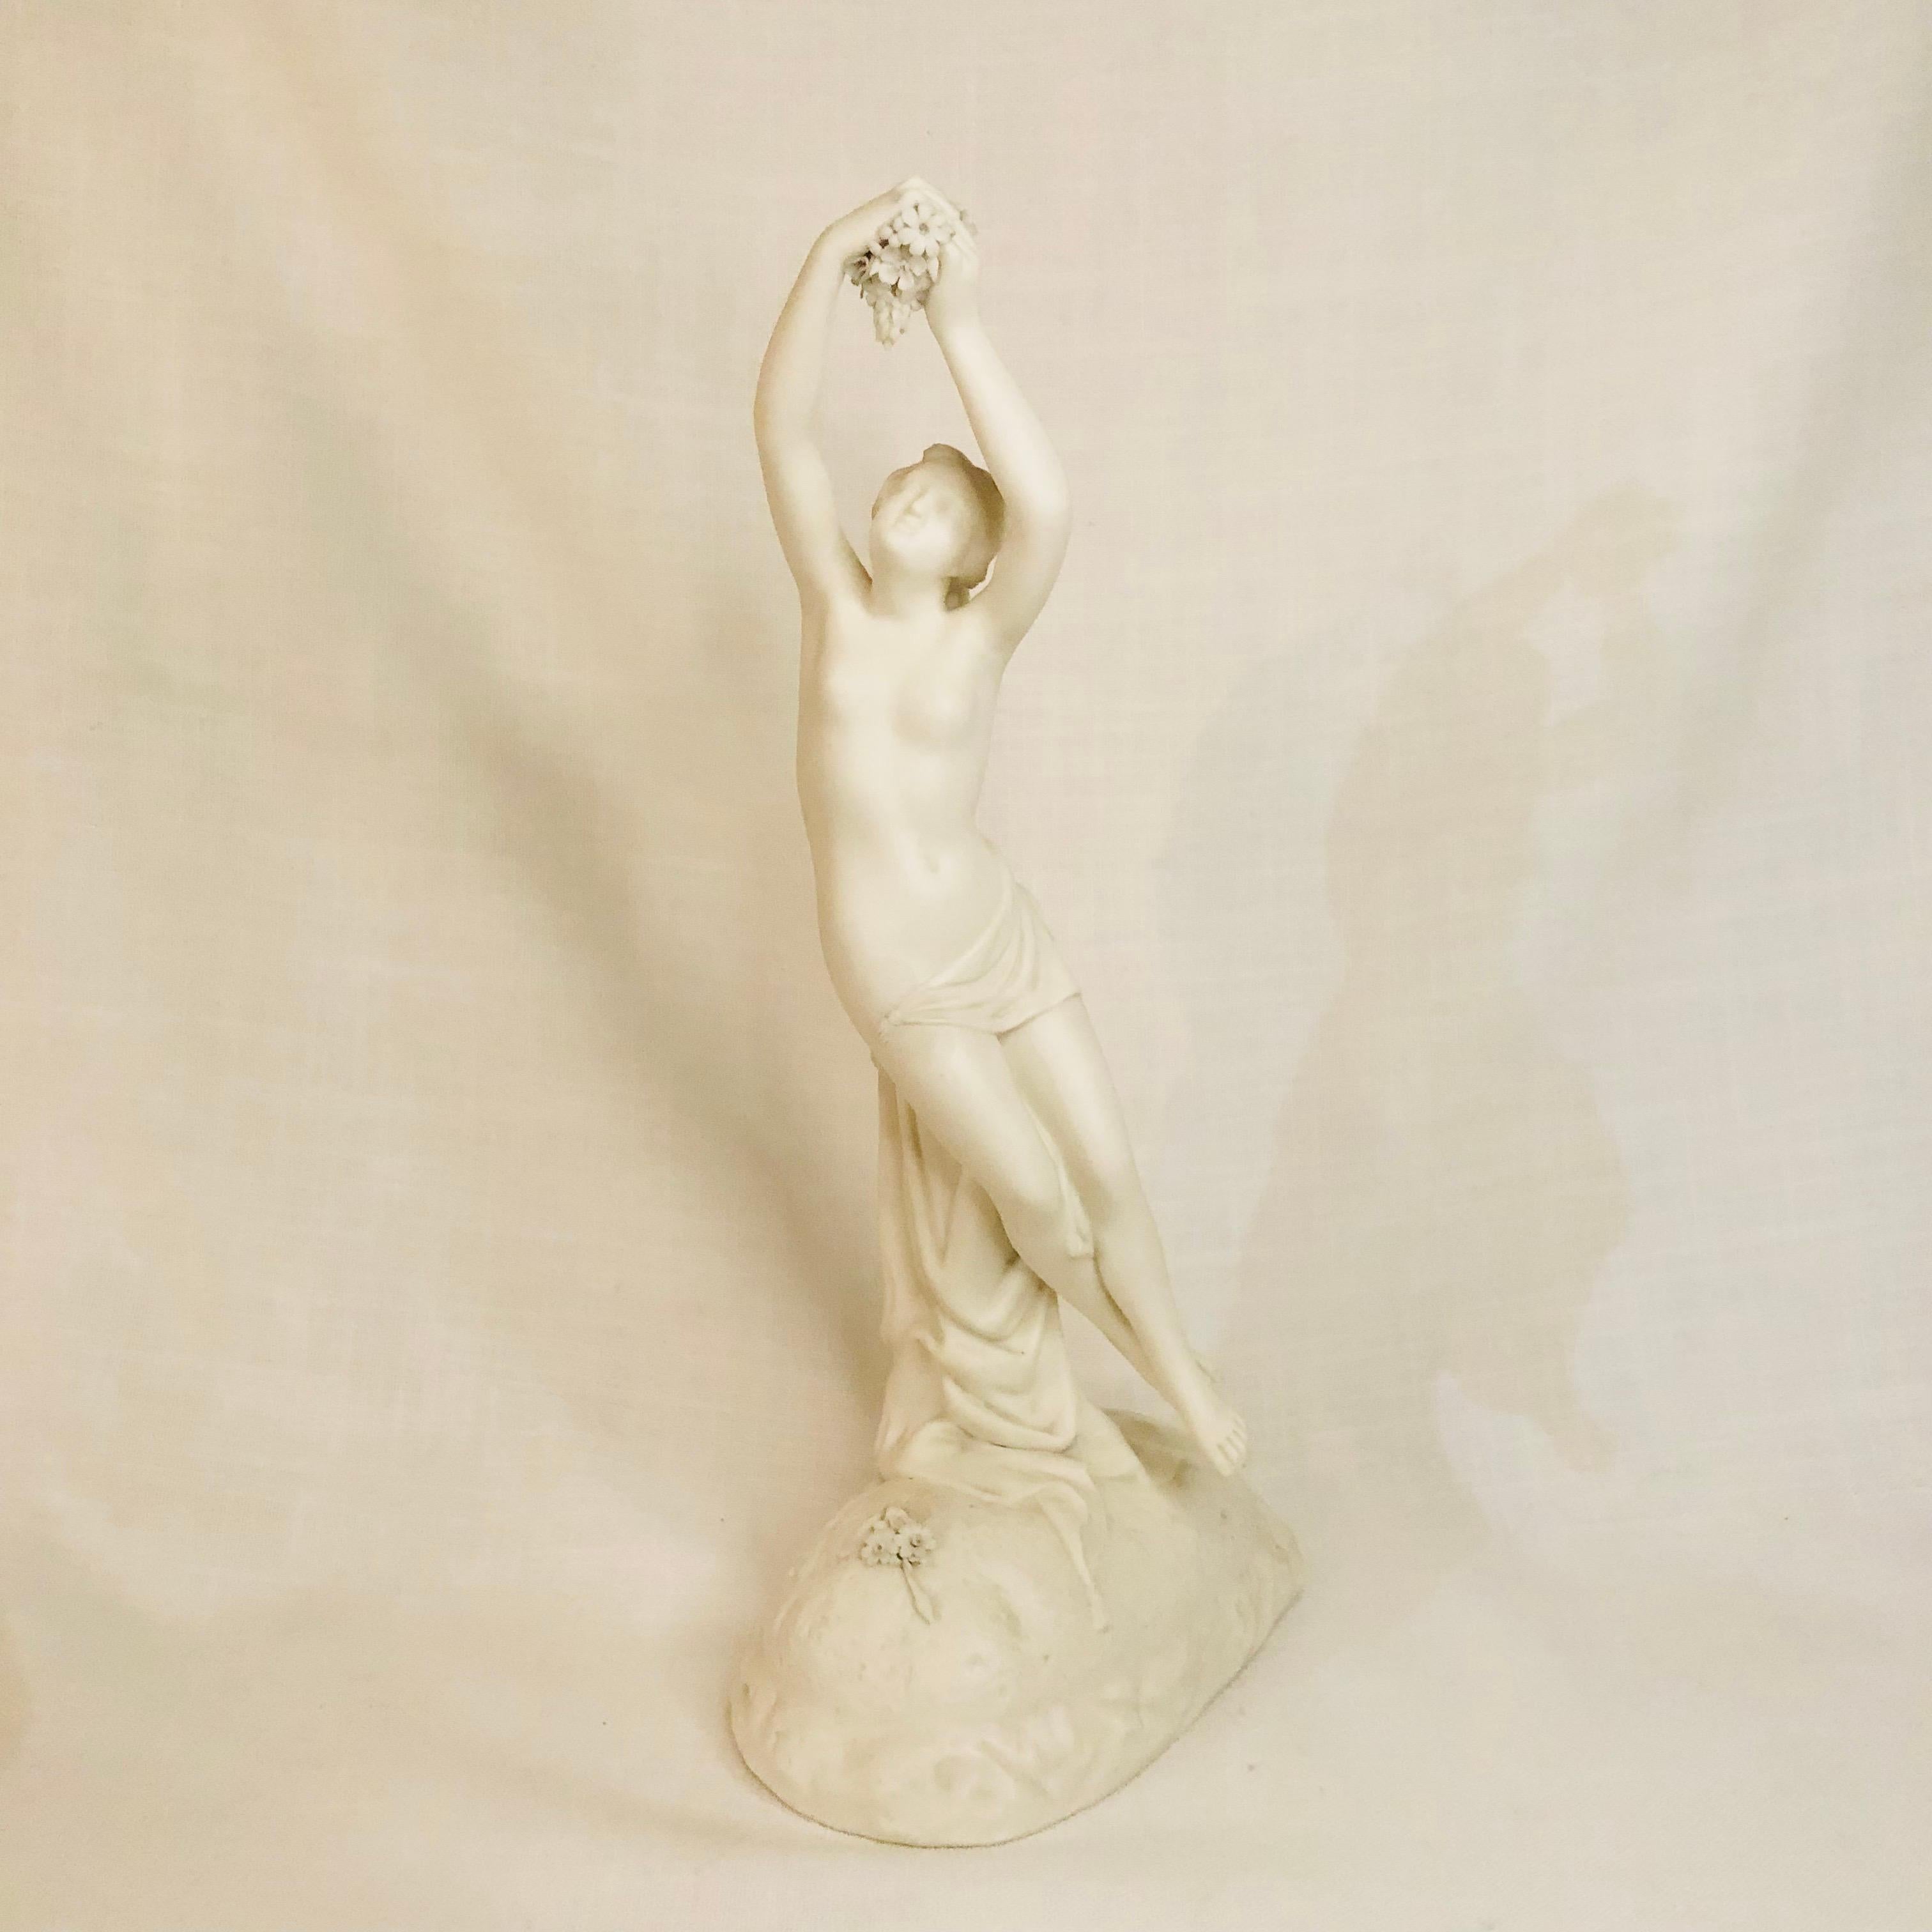 This is a very graceful and beautiful English parian figure of a semi-nude lady who is looking upward at the grapes she is holding with her outstretched arms above her head. She has draped flowing fabrics around her lower body. This figure is made